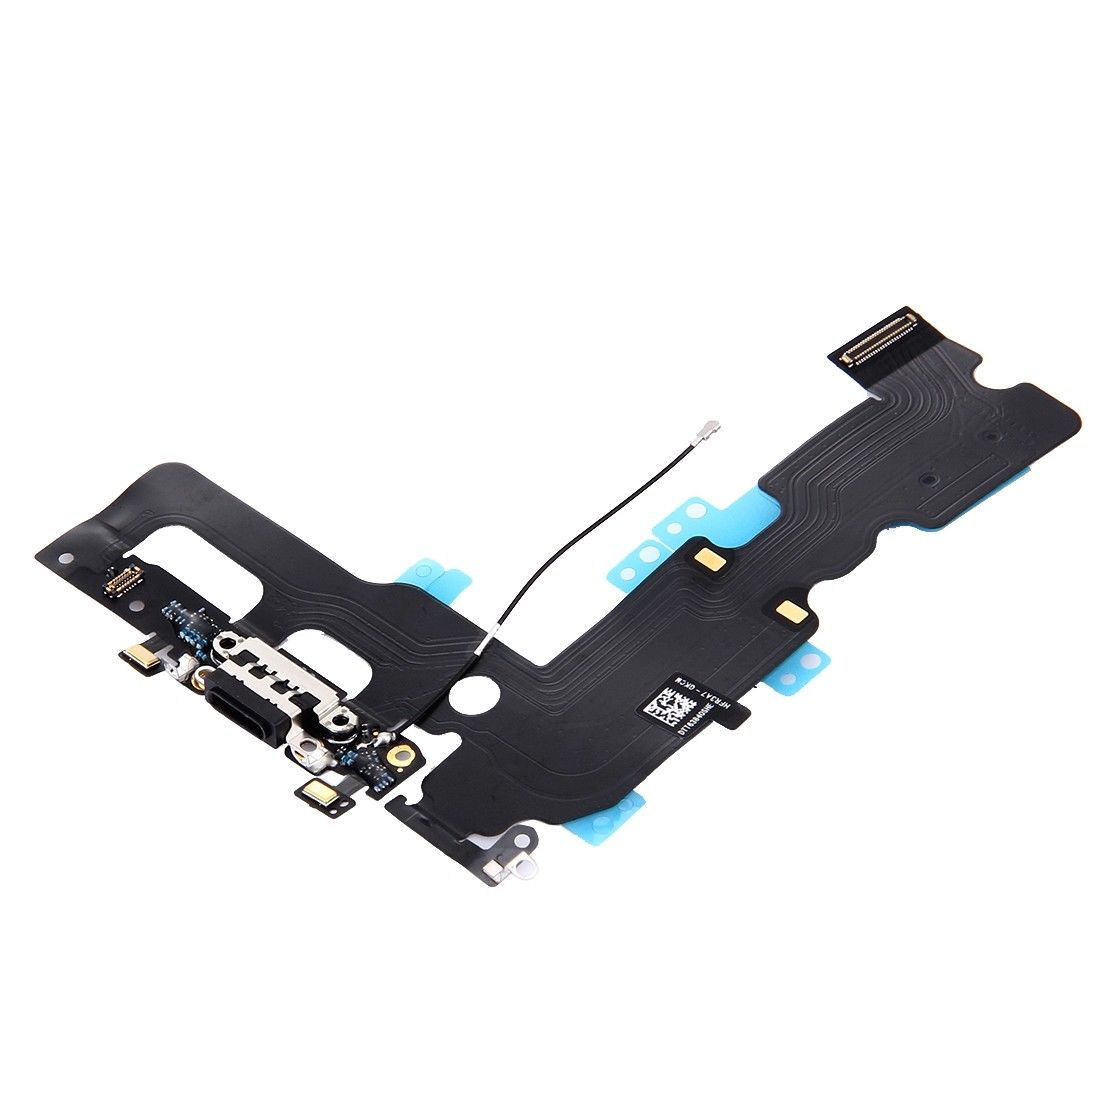 Apple iPhone 7 Plus Charging Port Flex Cable - Black for [product_price] - First Help Tech